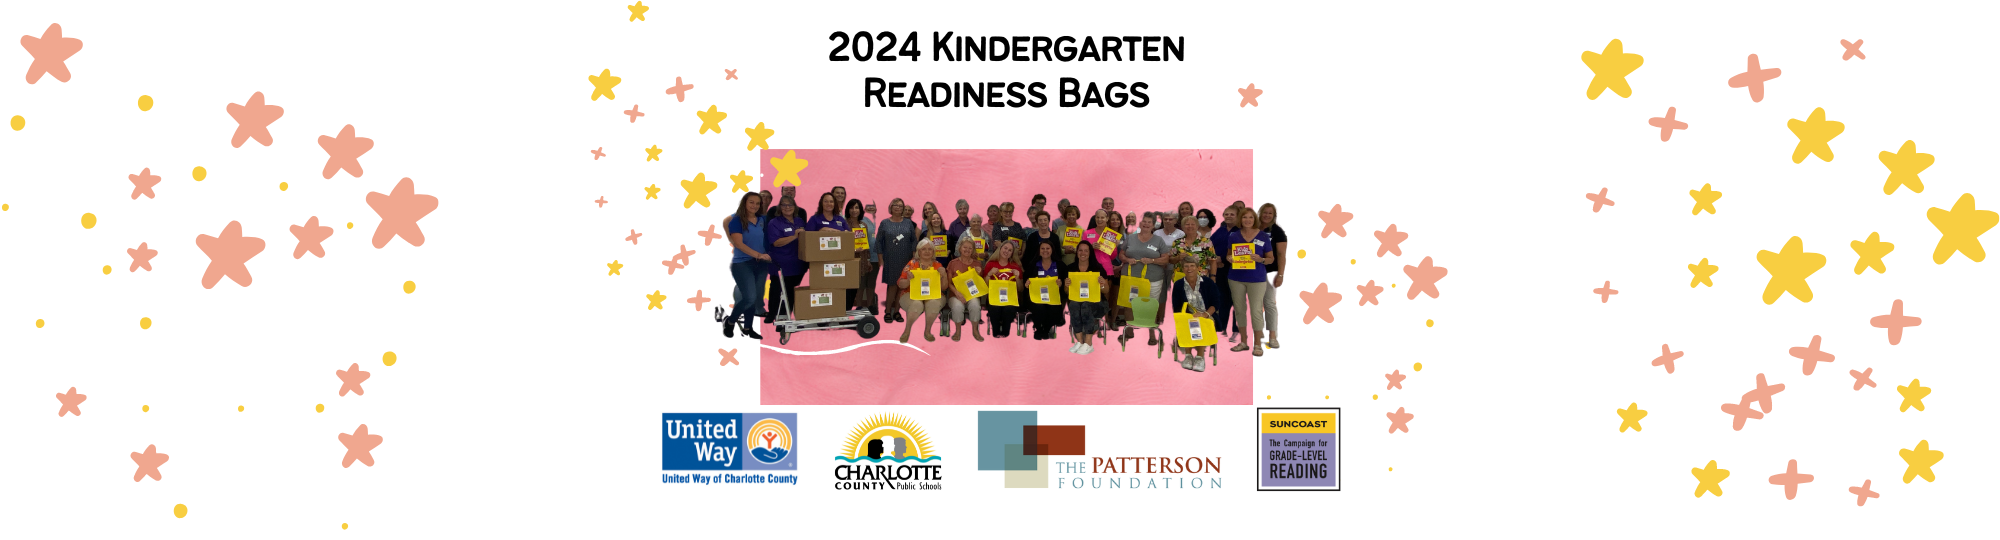 group photo from 2023 Kindergarten Readiness Bag event